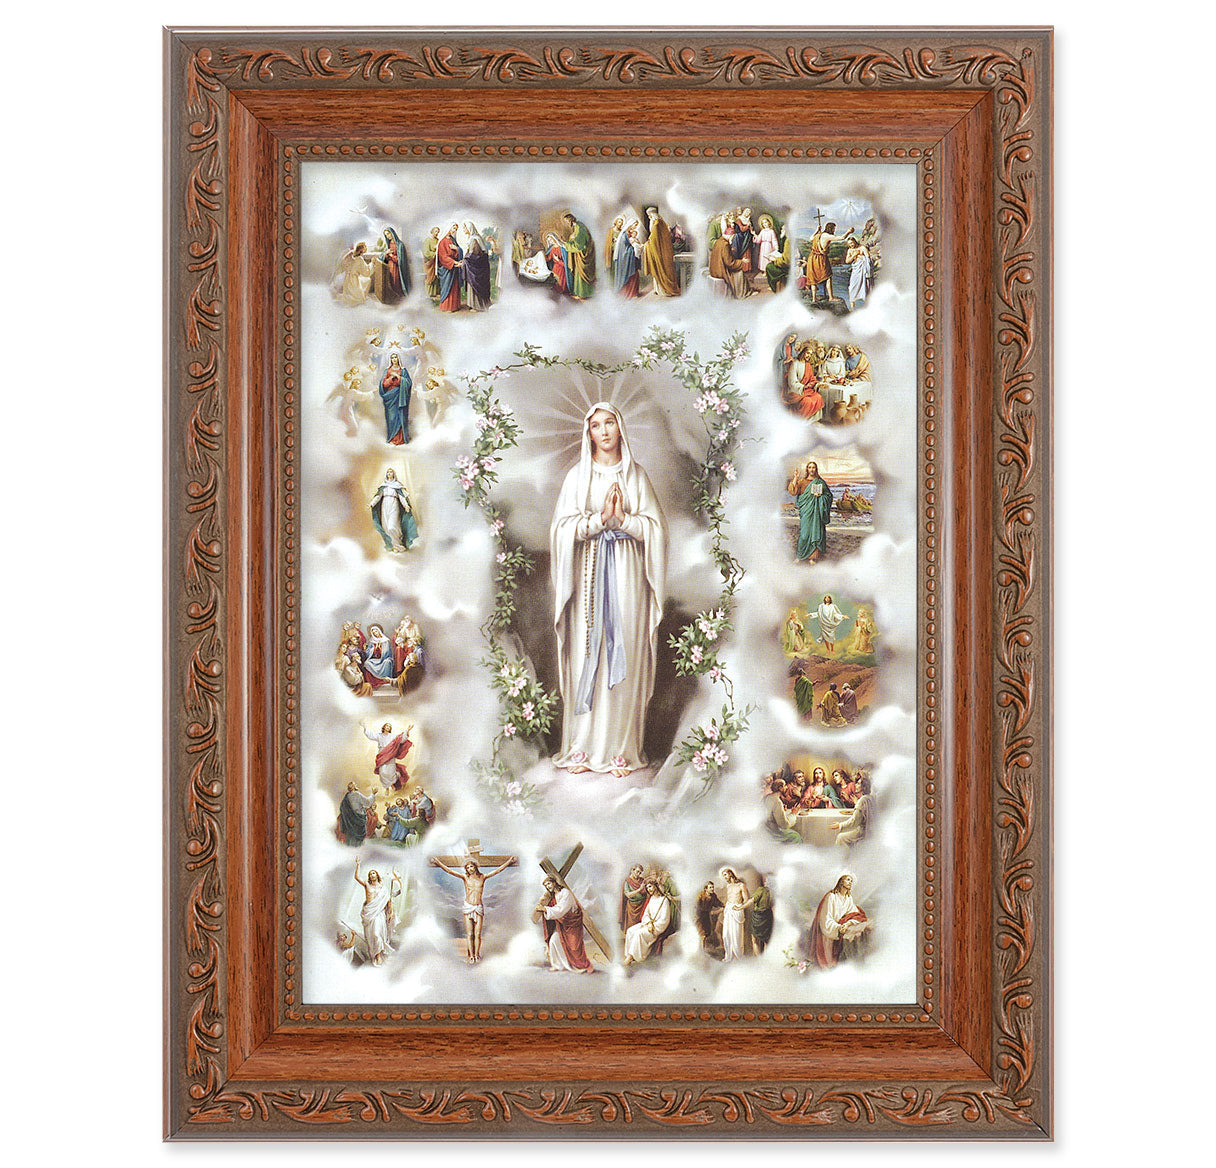 20 Mysteries of the Rosary Picture Framed Wall Art Decor Medium, Antiqued Dark Mahogany Finished Frame with Acanthus-Leaf Detail